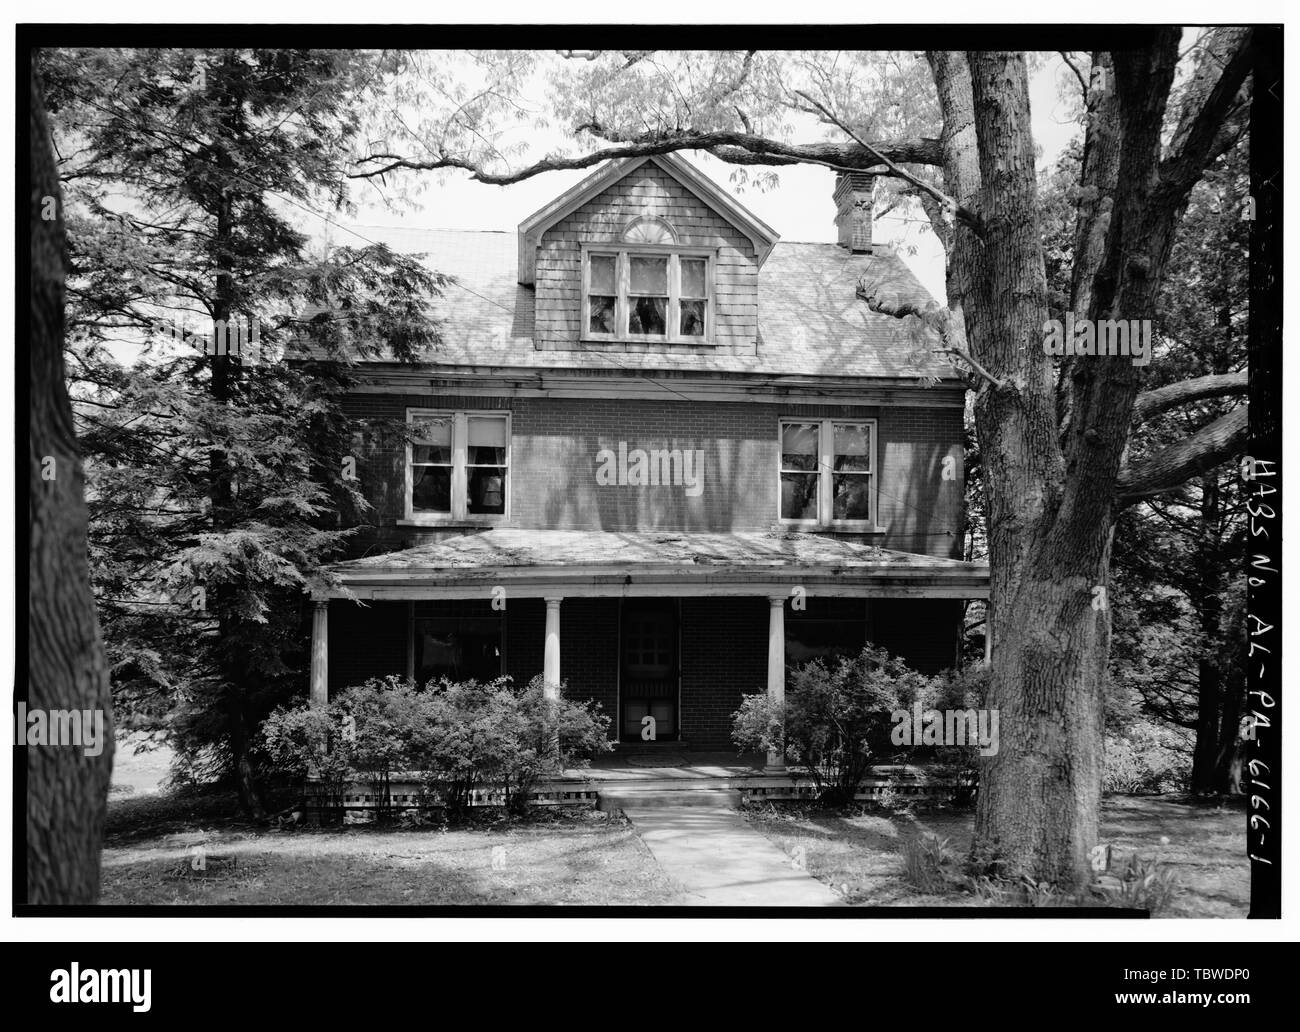 MAIN FACADE OF HOUSE, LOOKING NORTHEAST  Earlston Thropp House, North side State Route 1004, west of Township Route 503, Earlston, Bedford County, PA Thropp, Earlston Thropp, Joseph Earlston Benz, Sue, transmitter Lowe, Jet, photographer Wallace, Kim E, historian Stock Photo